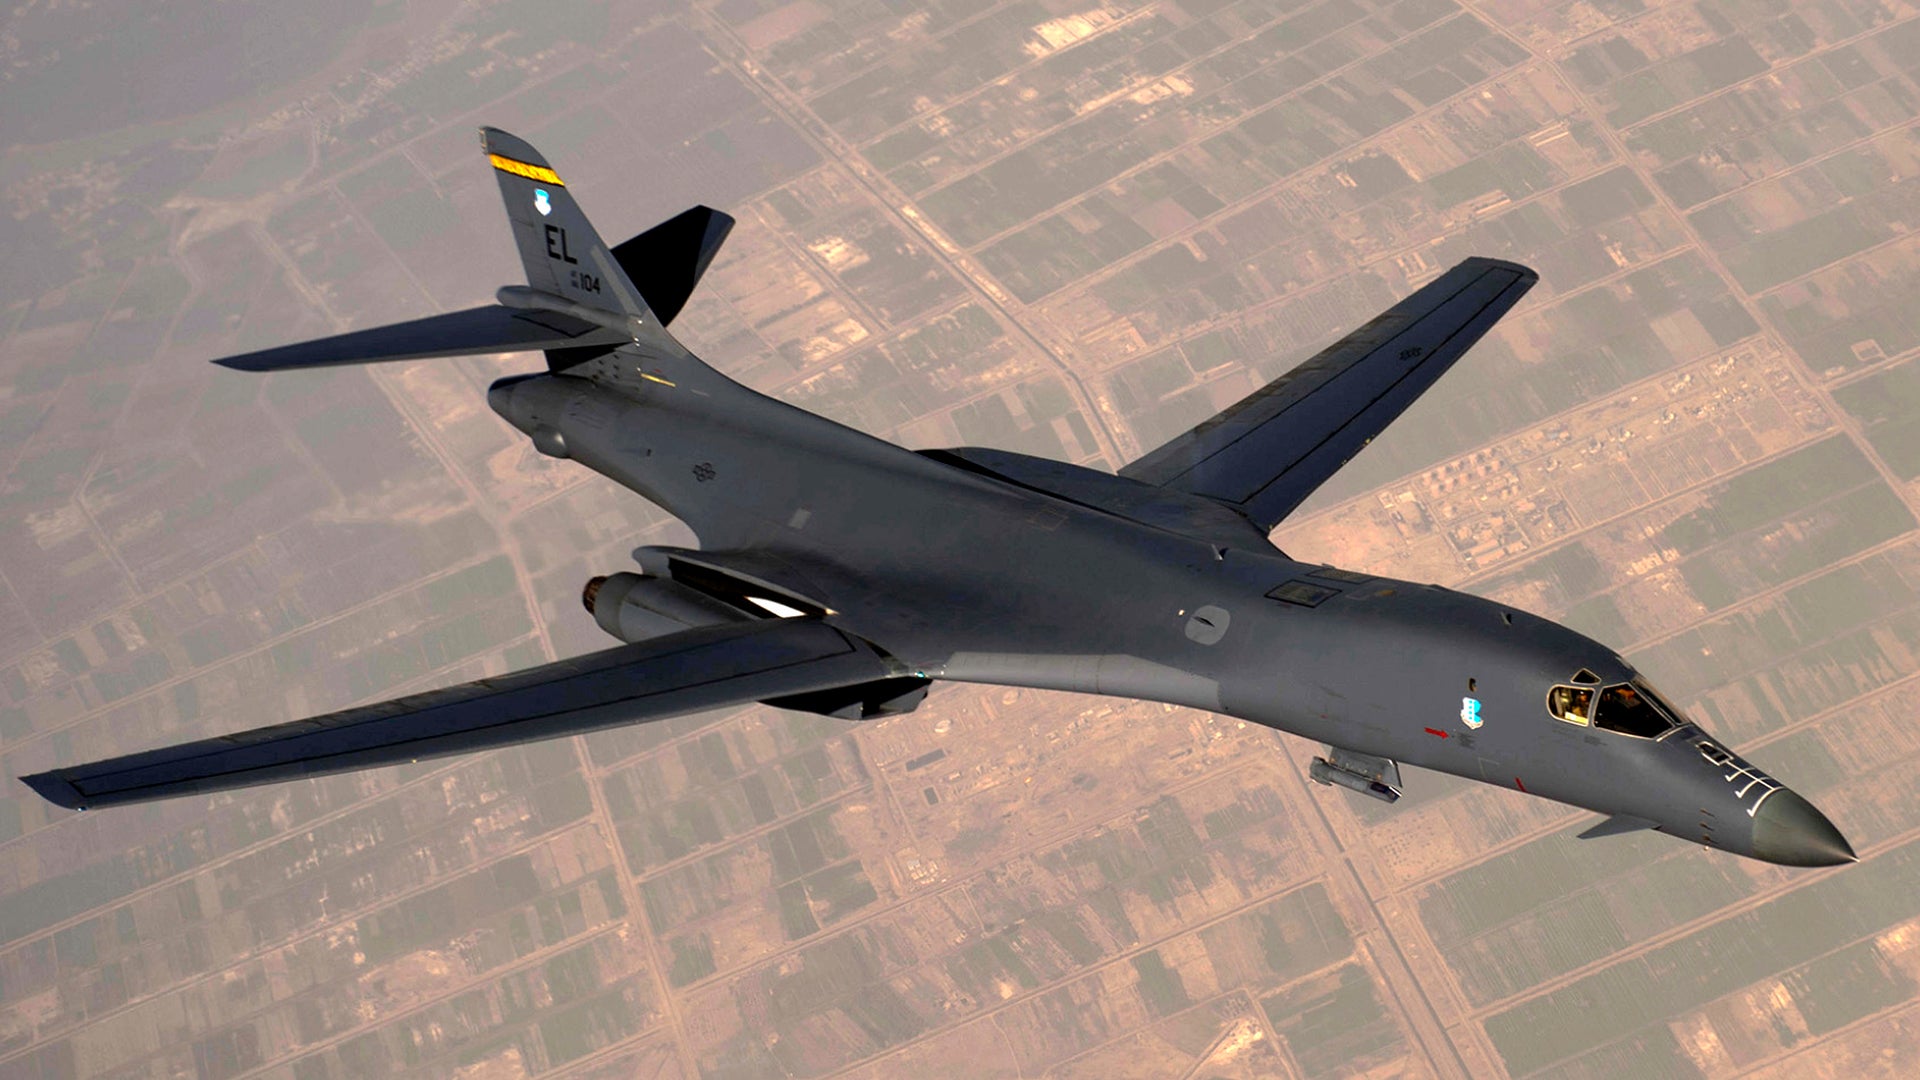 B-1 Bombers Return To The Skies But USAF Says Problems May Still Remain